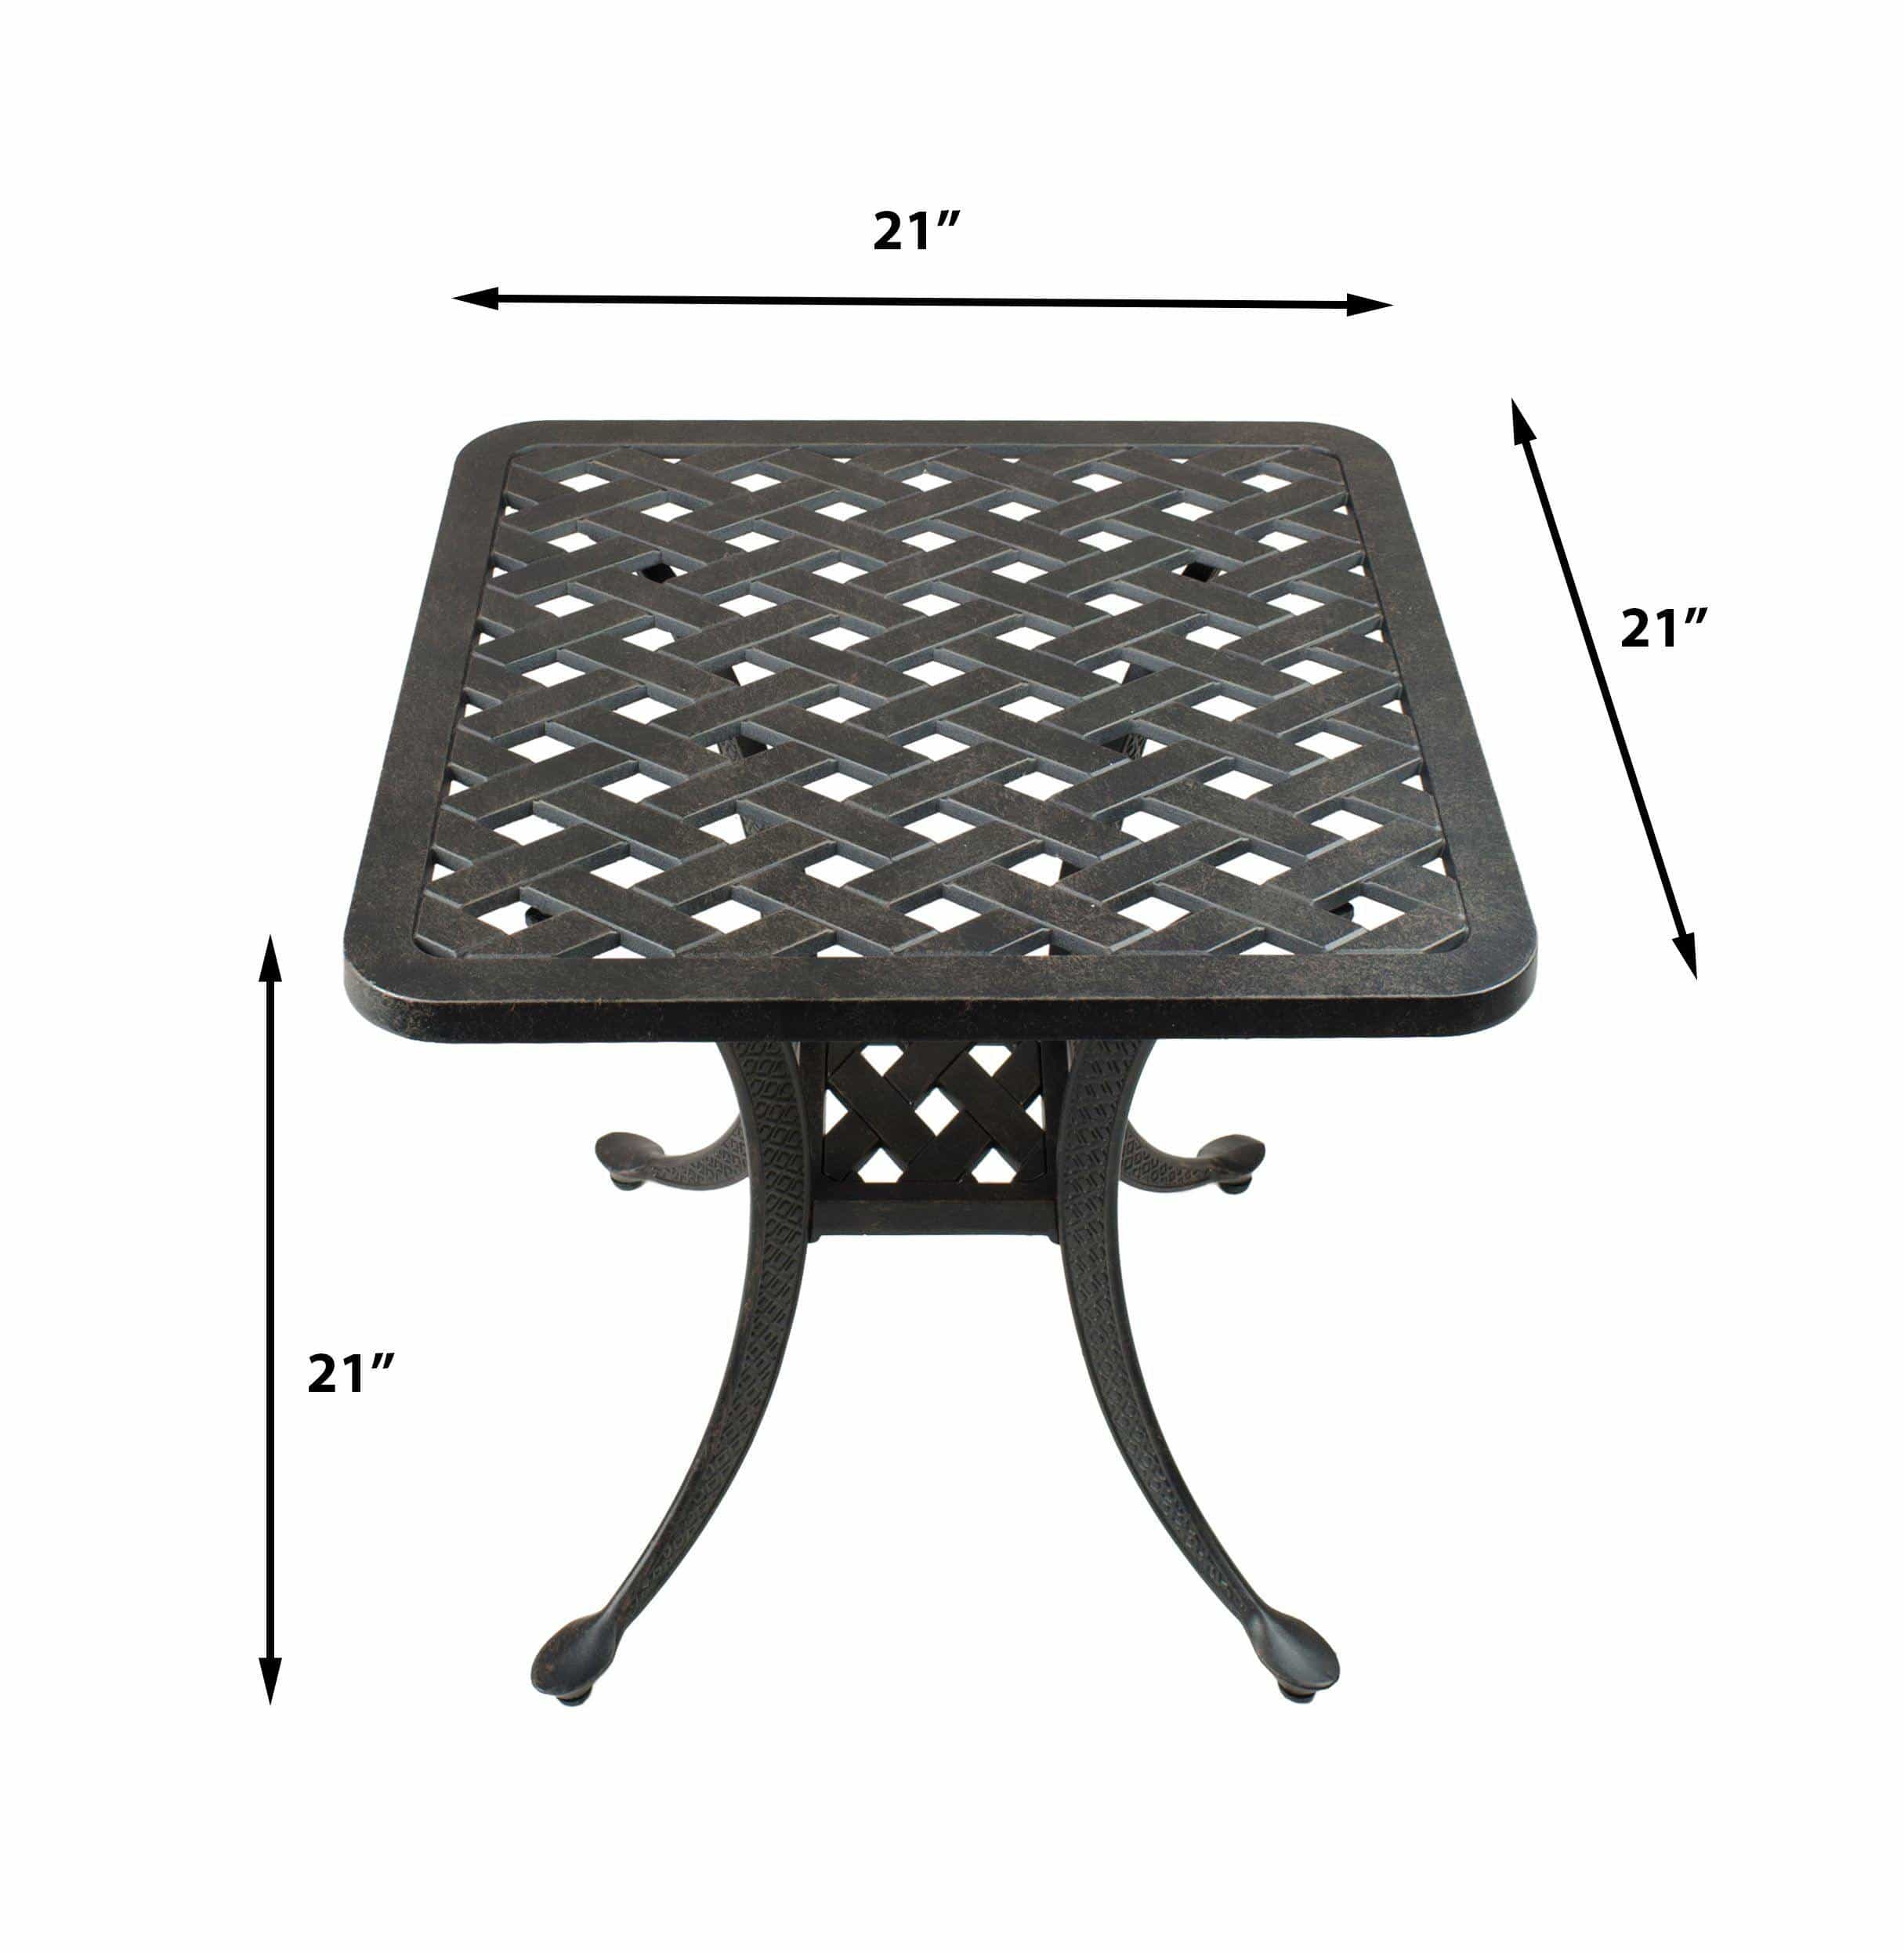 Lawton Casual Comfort Outdoor Dining Table Lawton Casual Comfort - 21" Square Accent Table Weave